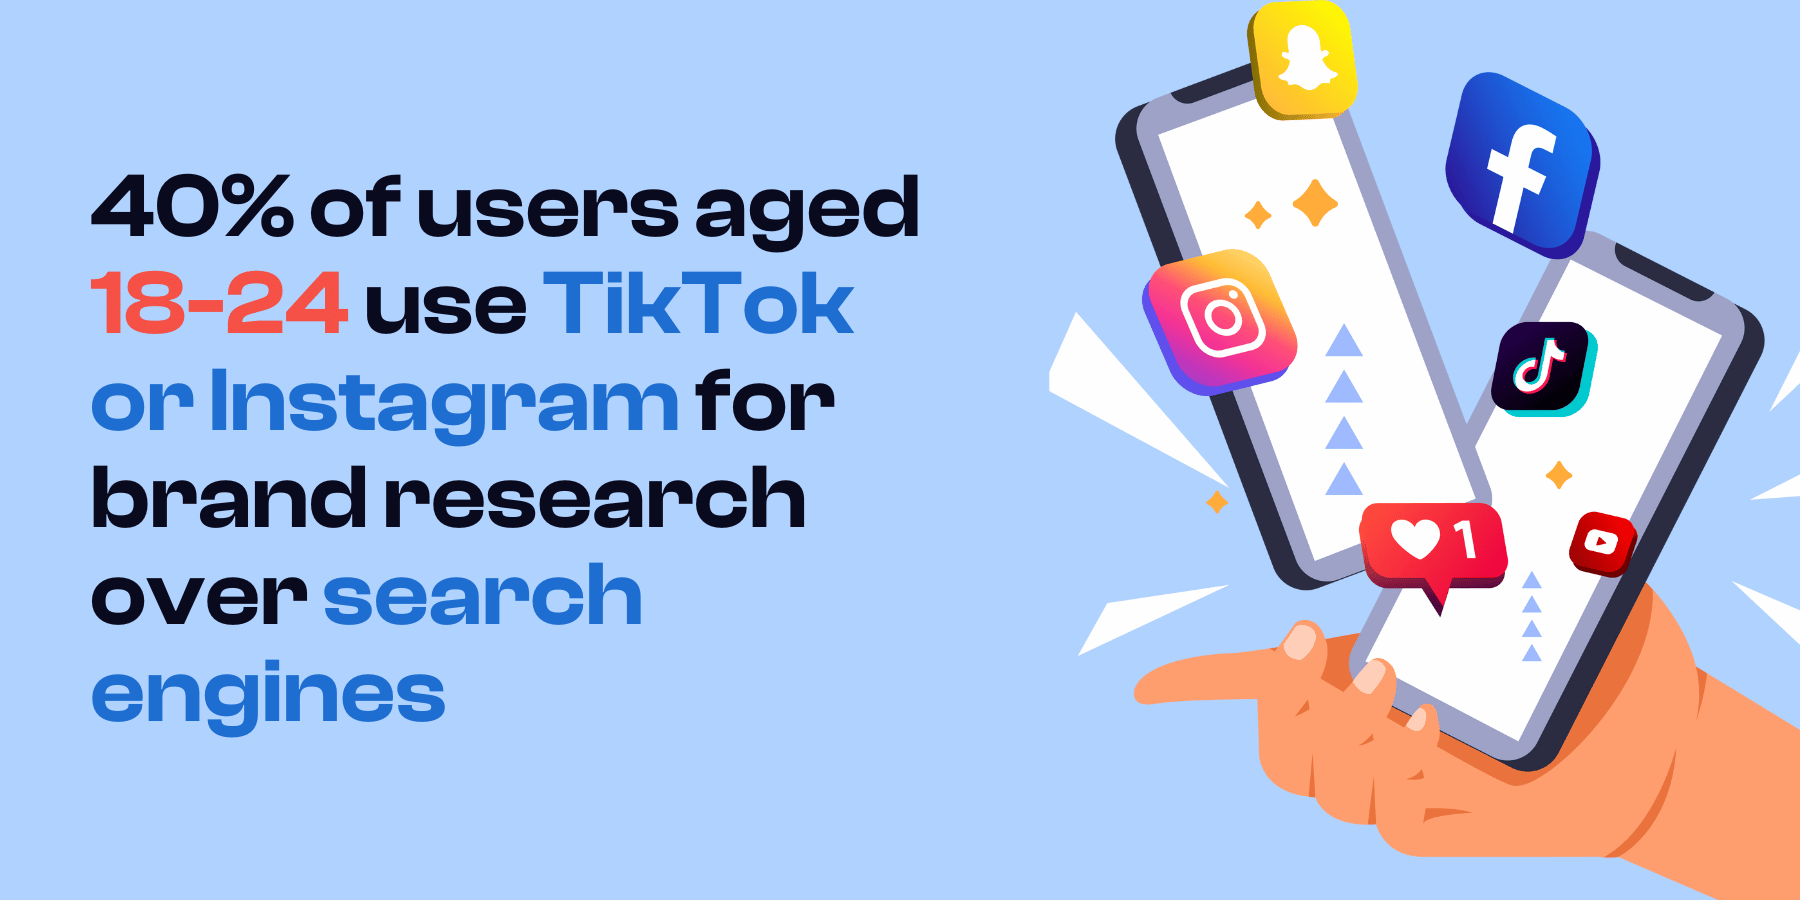 graphic showing how 40% of users aged 18-24 use TikTok for brand research